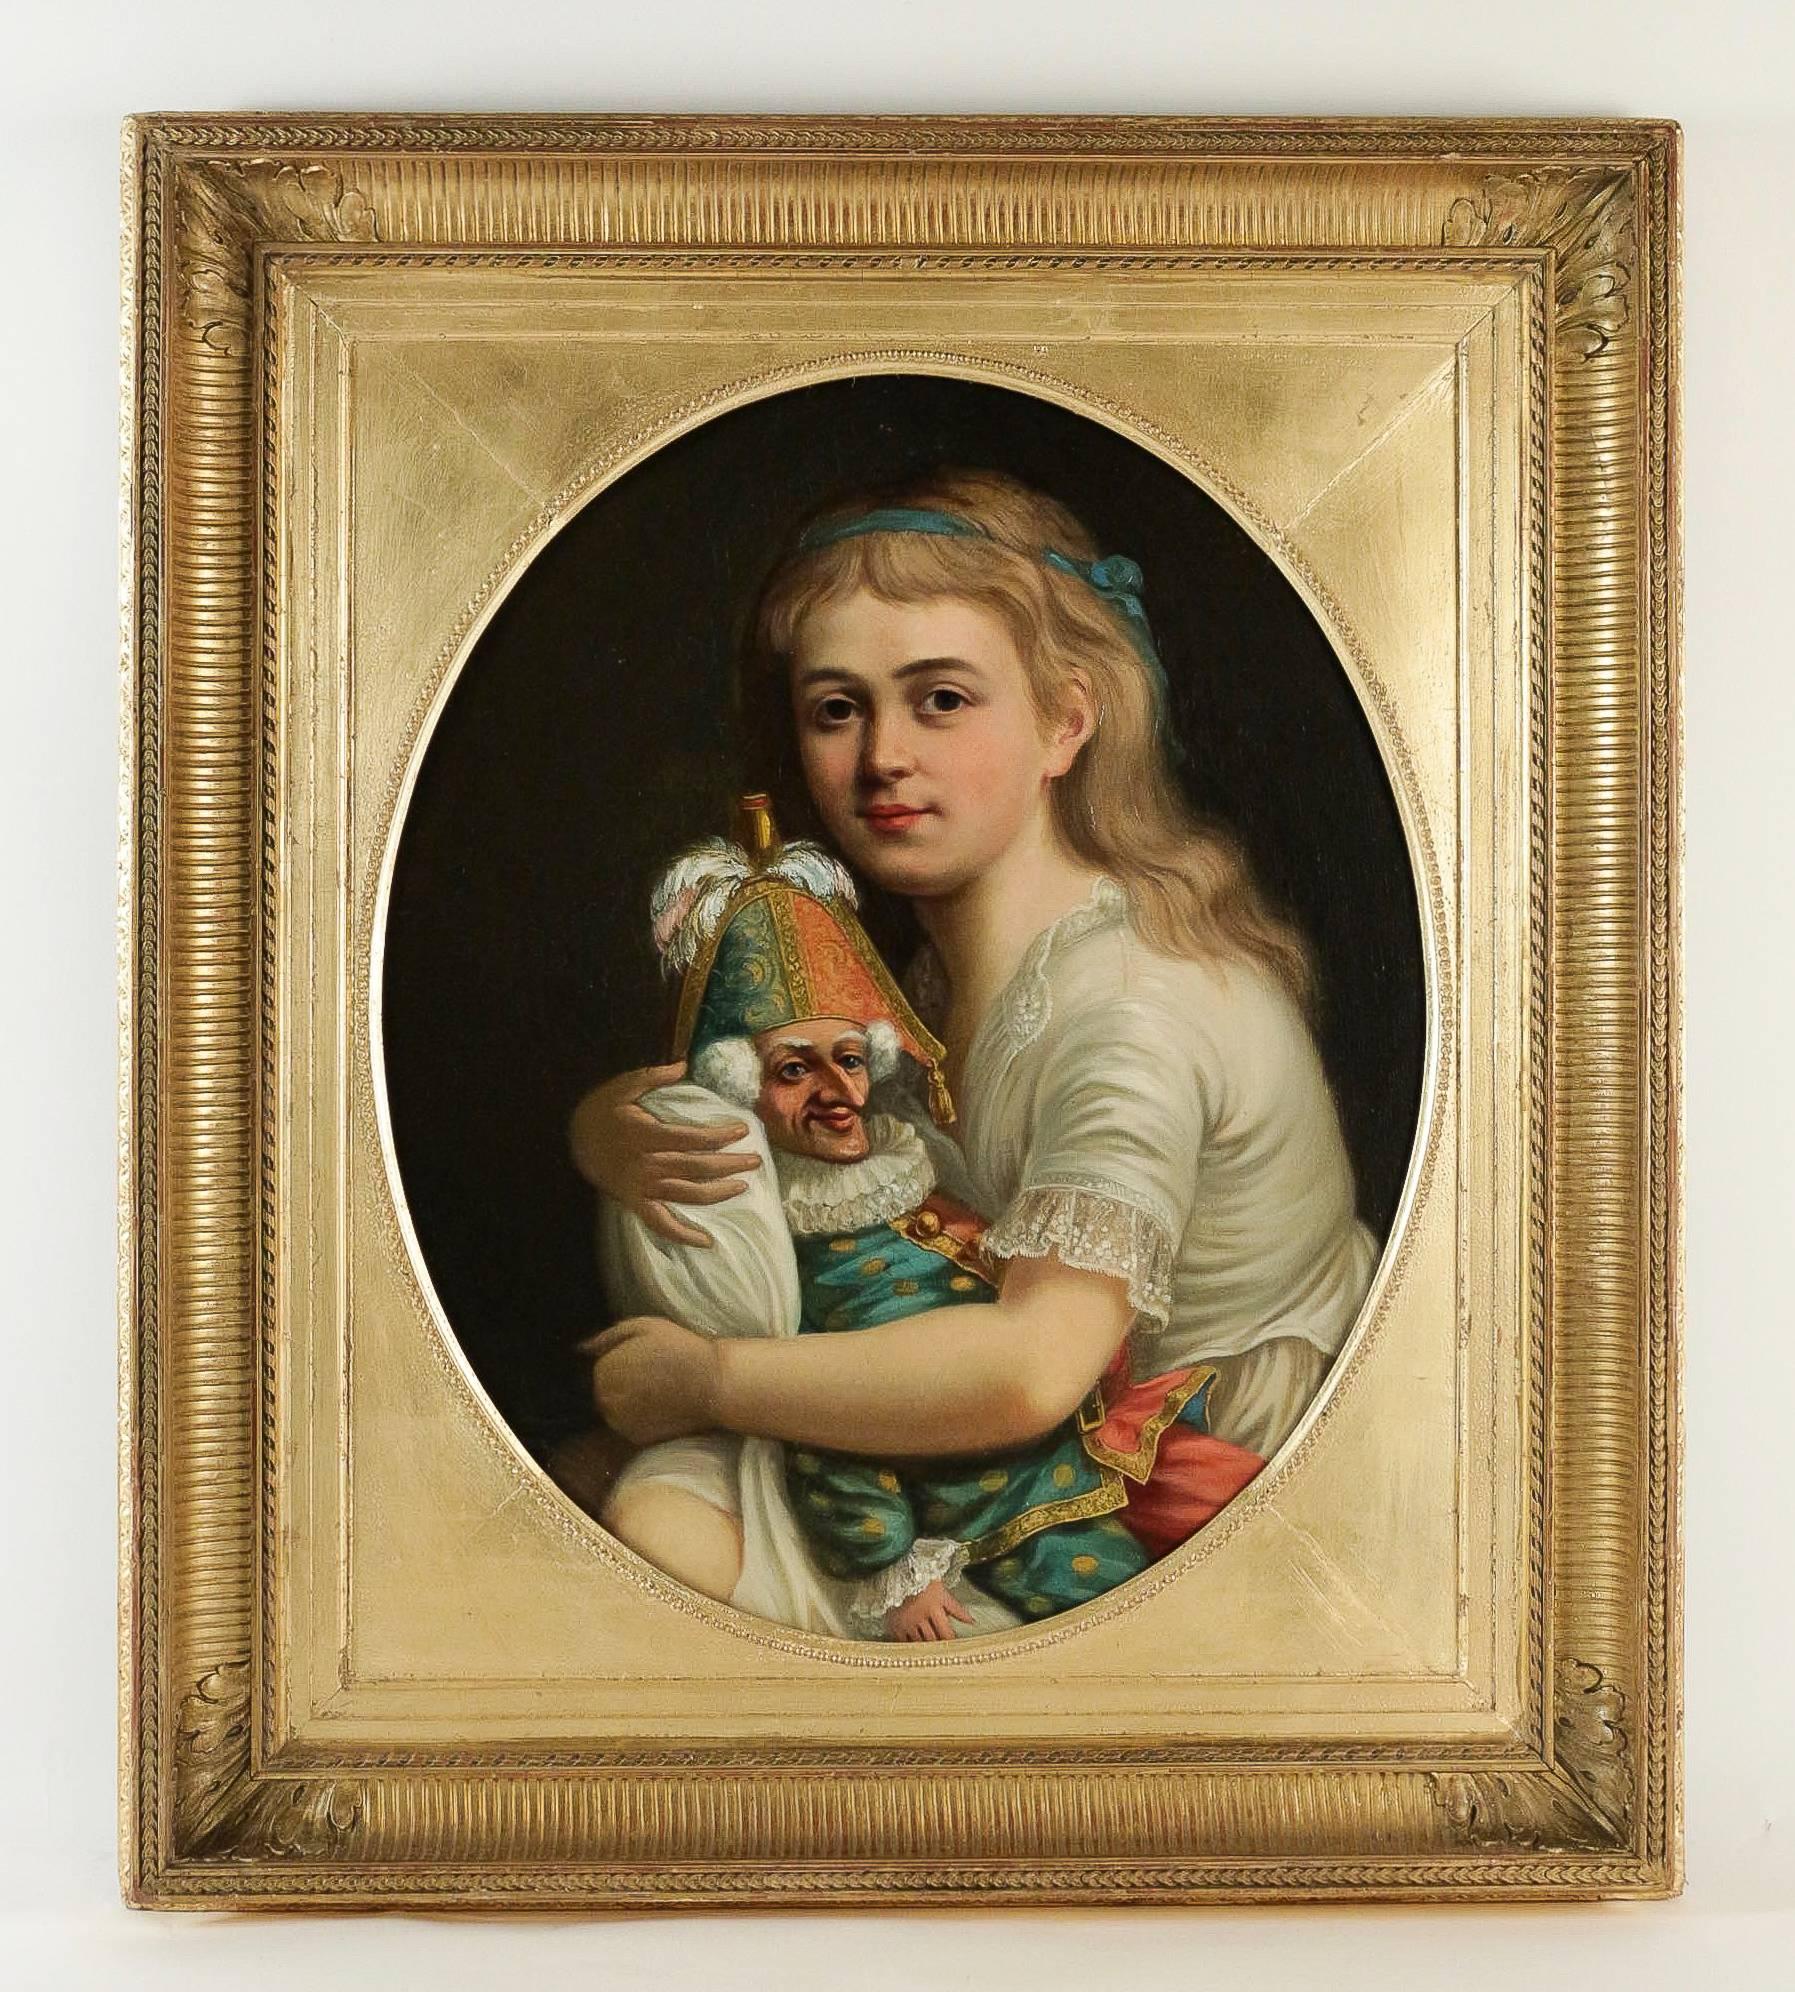 A lovely and decorative mid-19th-century Romantic French school, oil on canvas.
Our painting depicts a young girl with a buffoon in his hands.

The painting is in fine original condition with a beautiful hand-carved giltwood frame.

Measurements